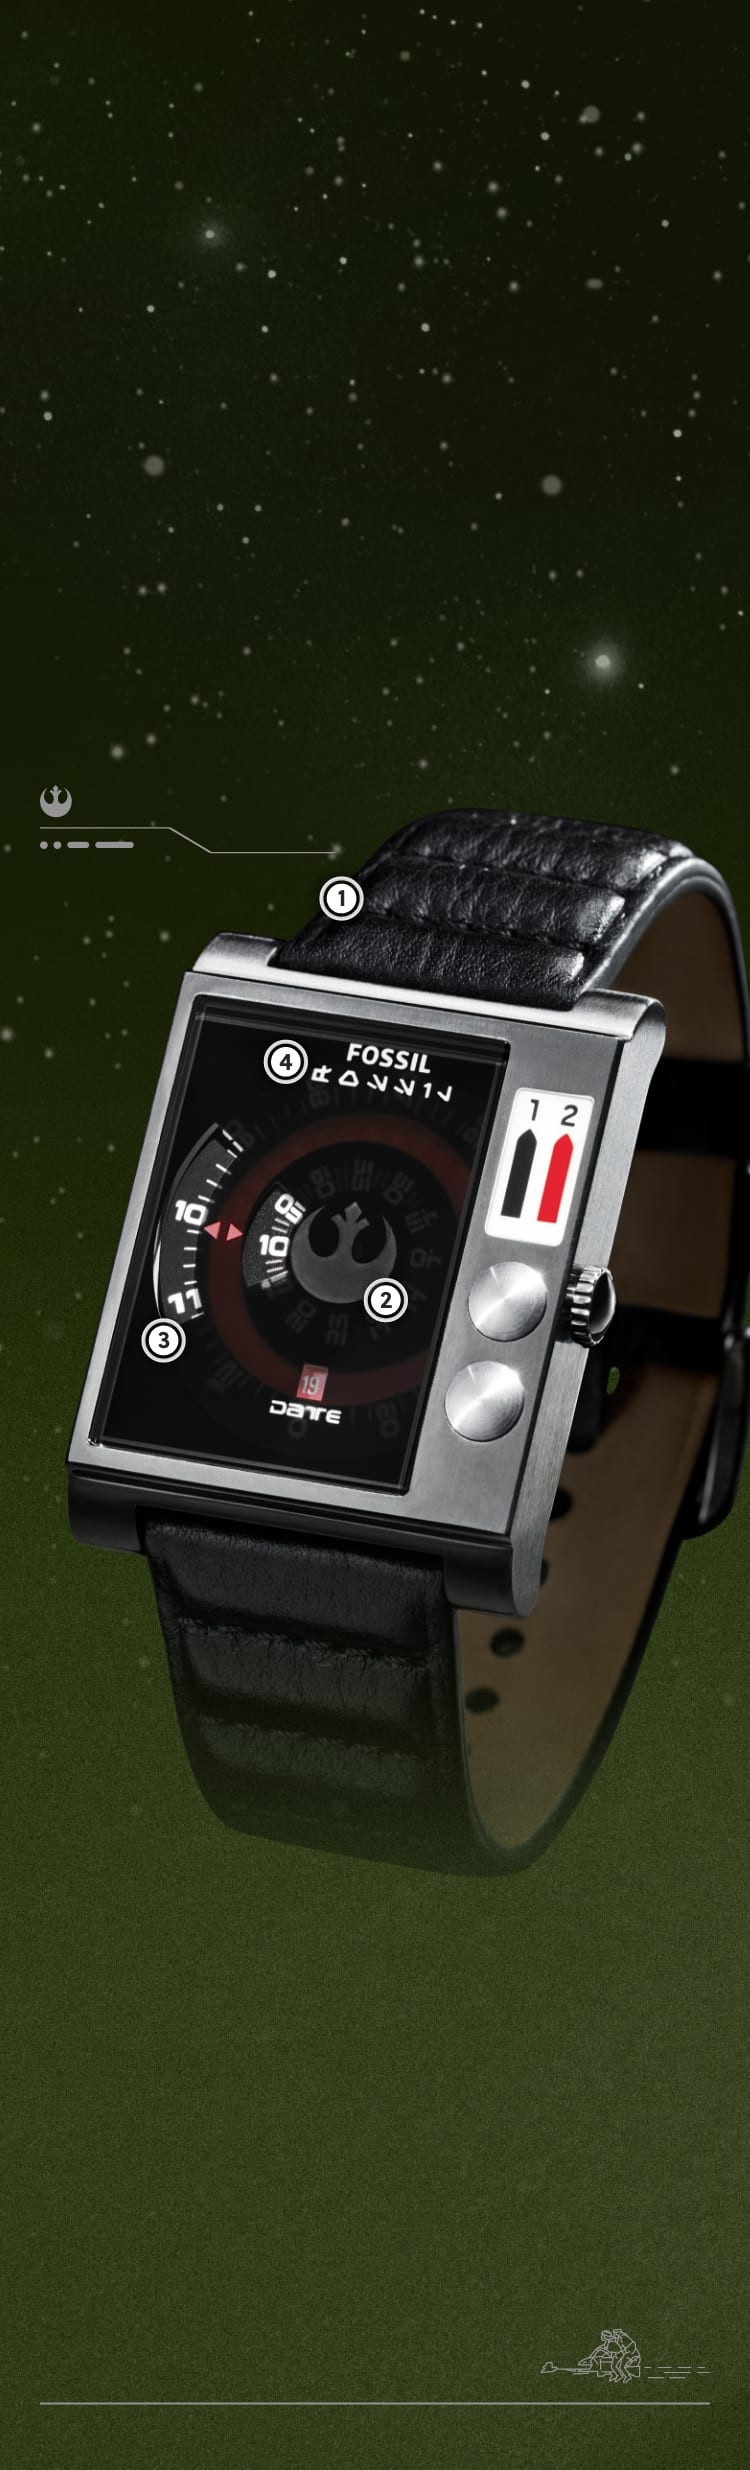 A close-up of a black, square-shaped watch with time-telling discs and padded leather strap